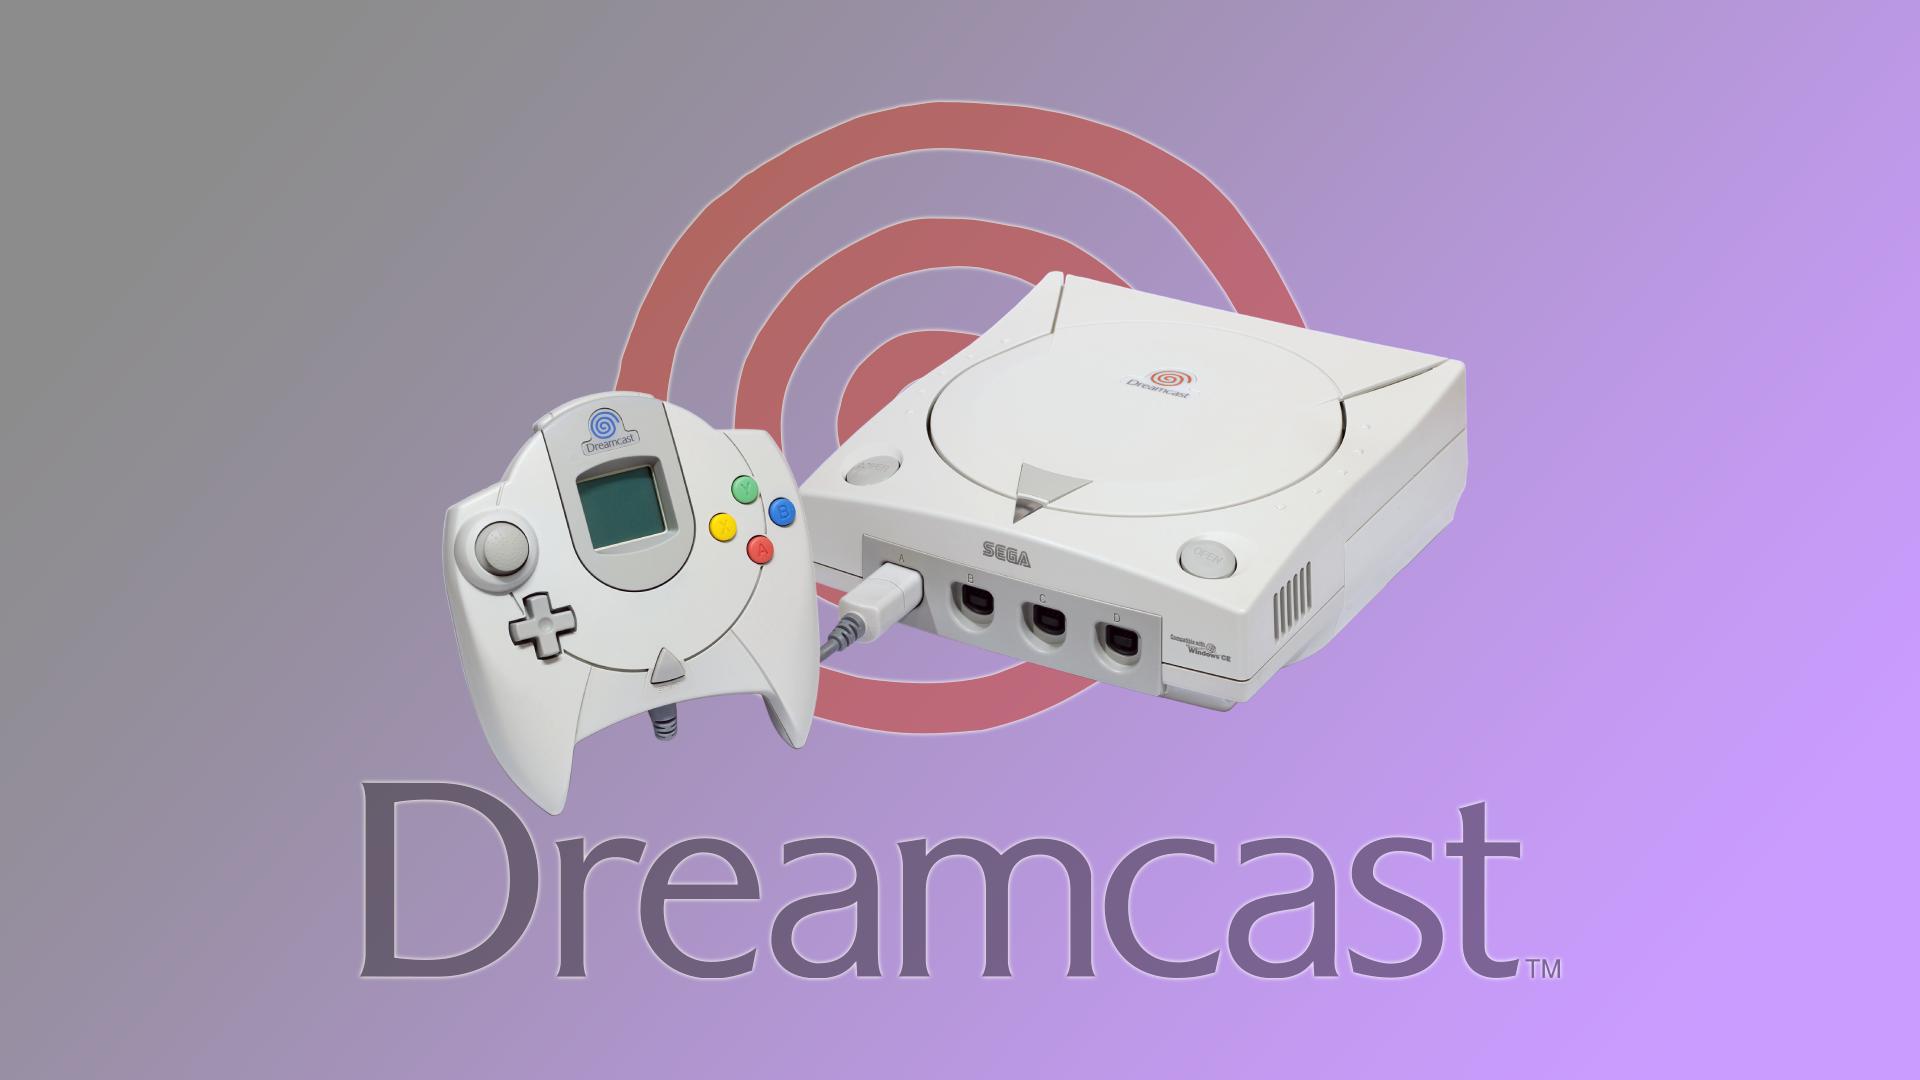 SEGA Dreamcast is already 24 years old